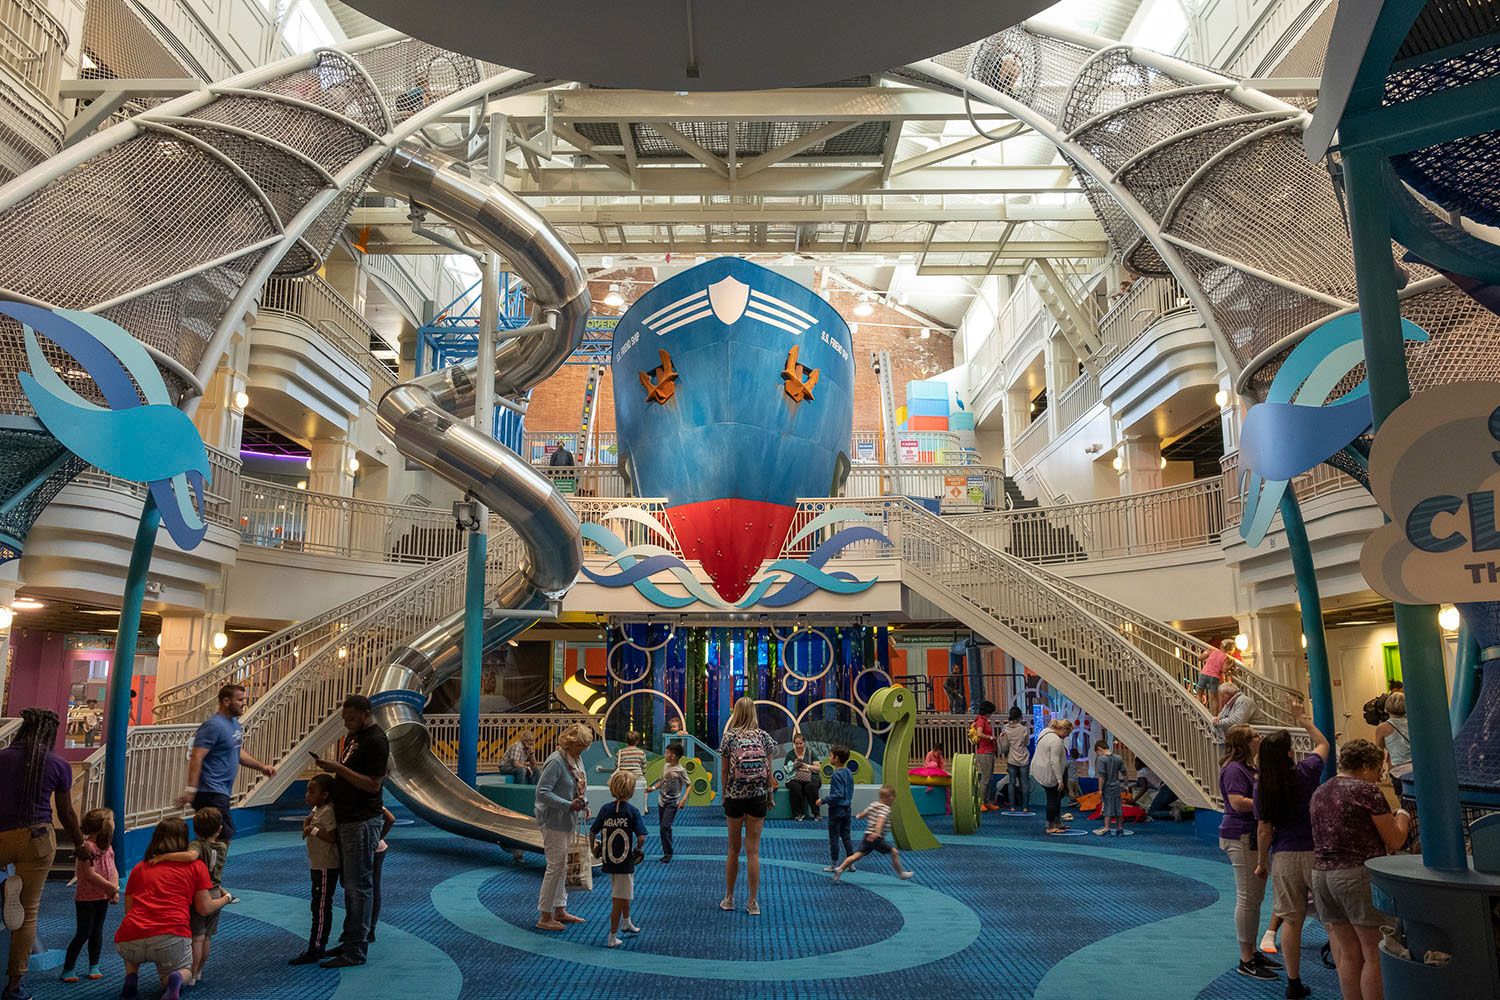 Families exploring Port Discovery's three floor Museum, including a multi-story climbing exhibit, slide and giant ship.